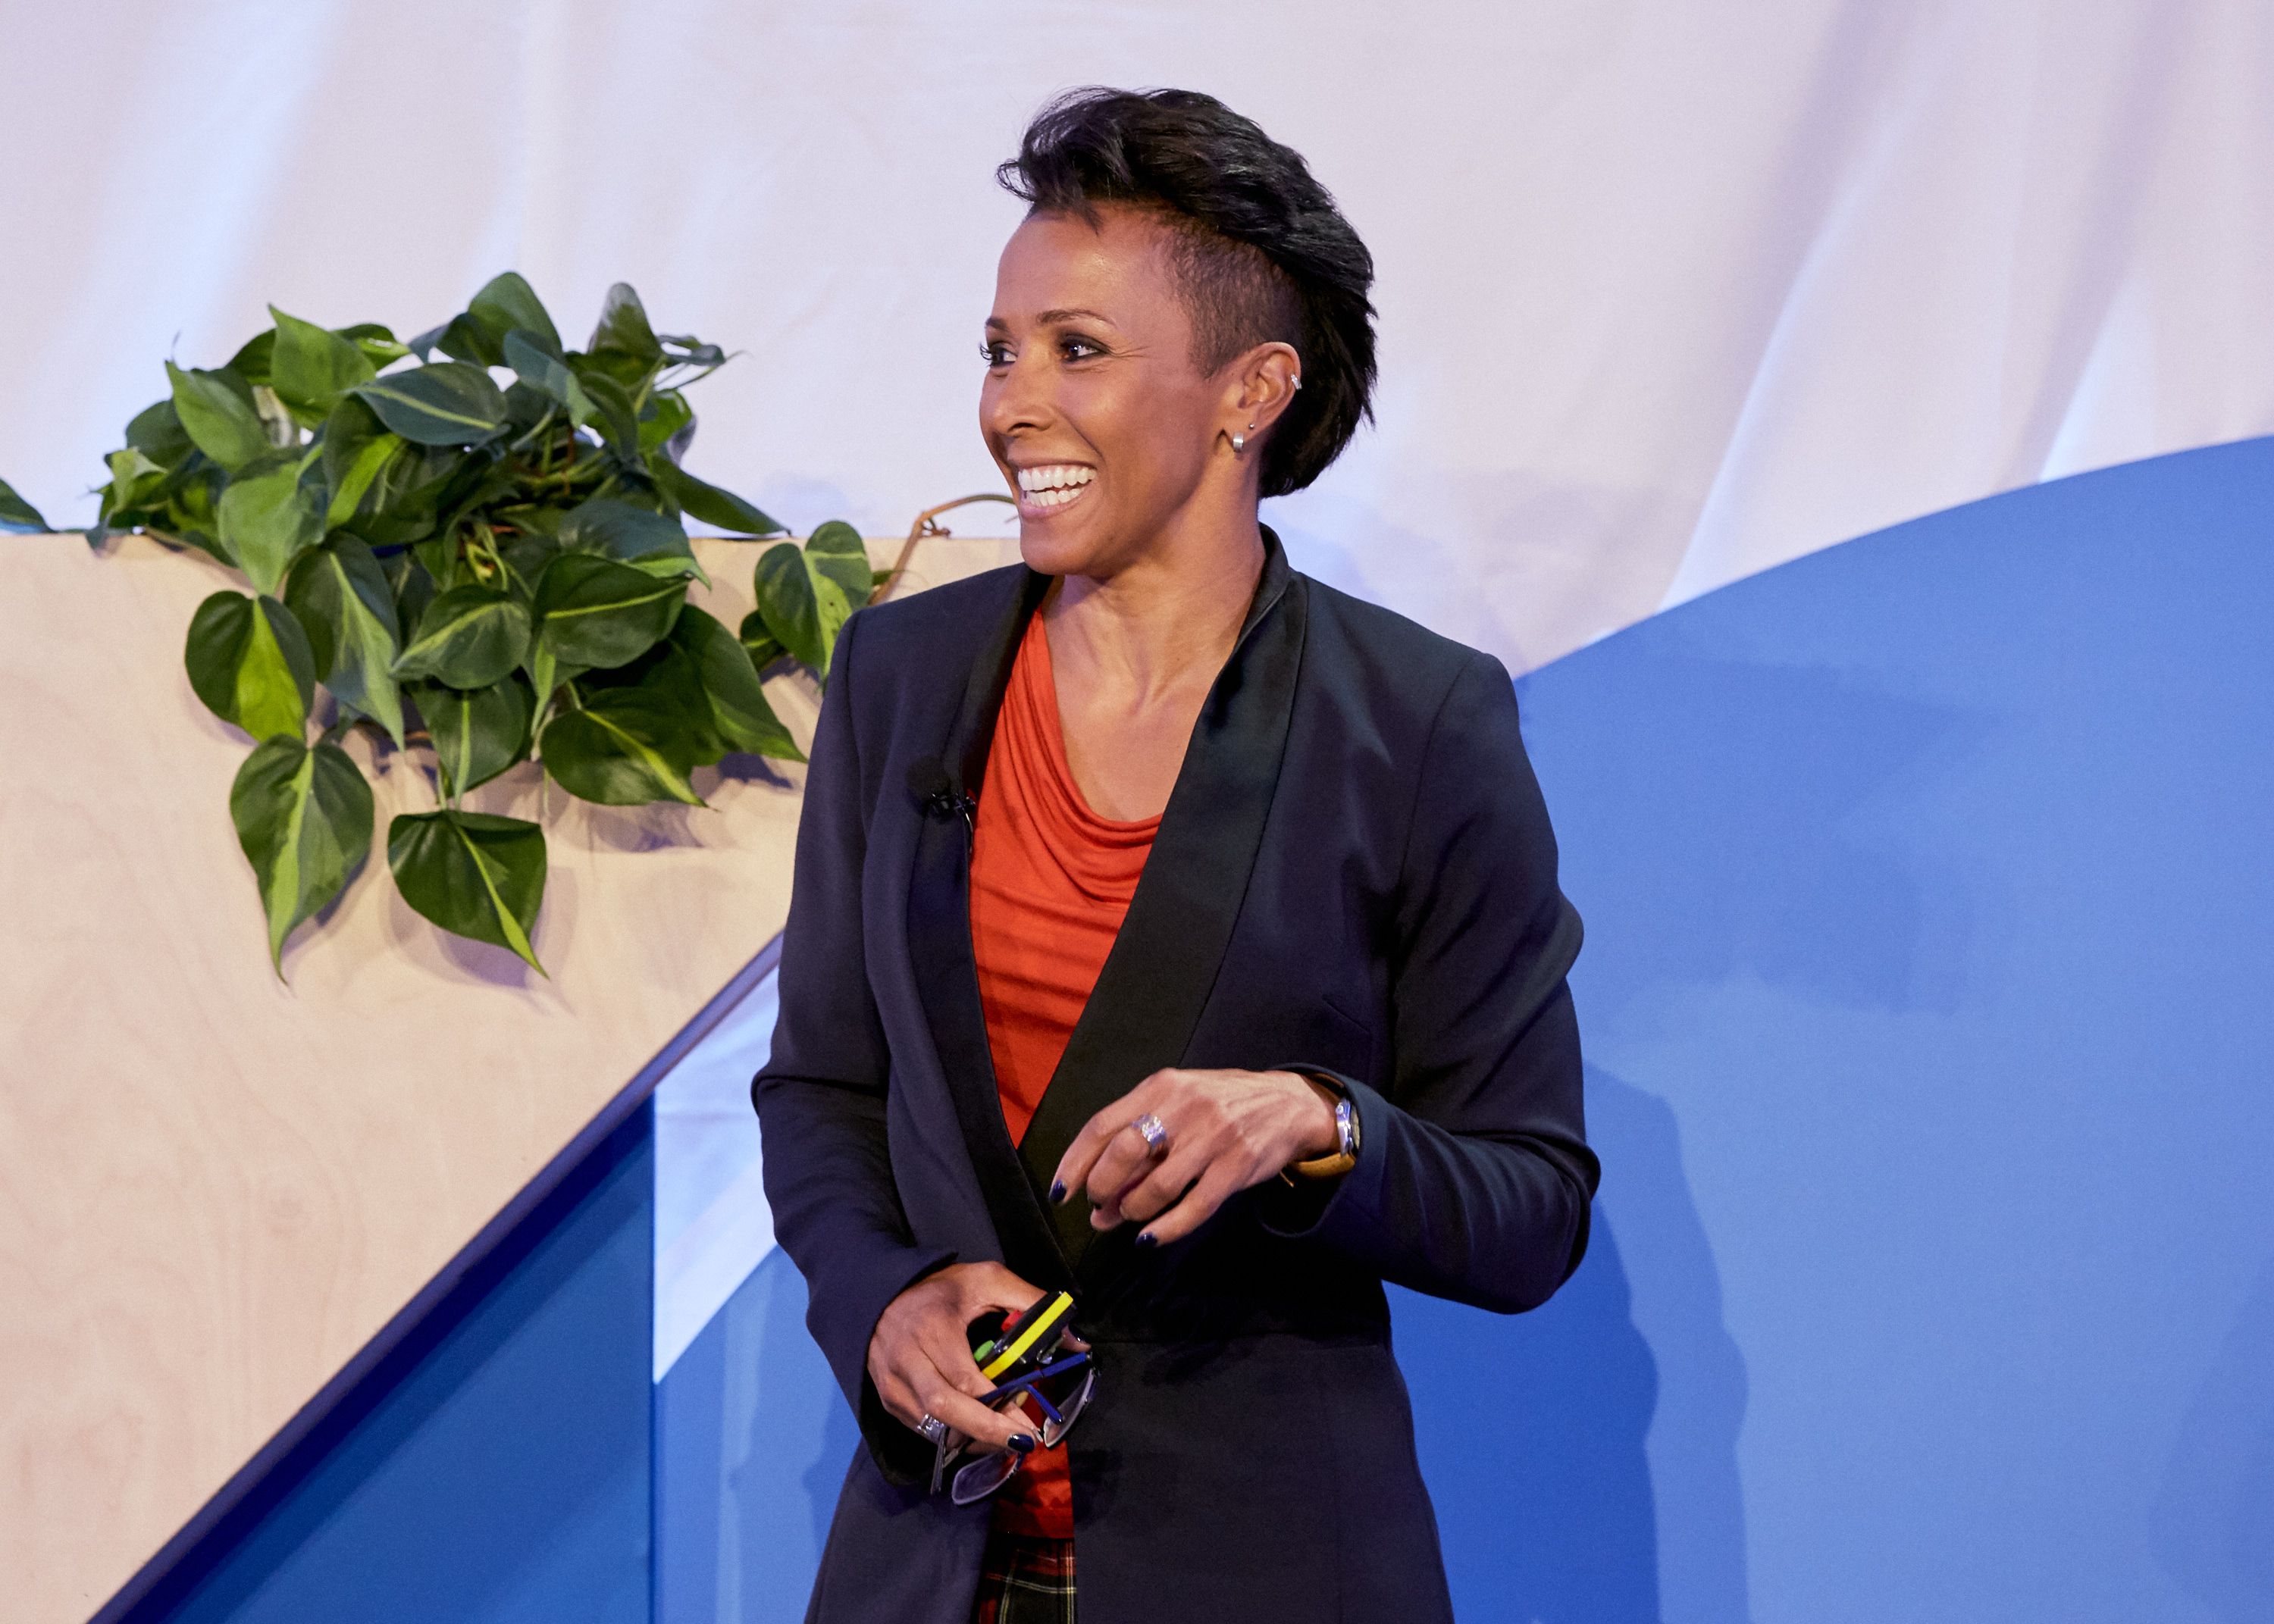 Dame Kelly Holmes MBE on learning to thrive